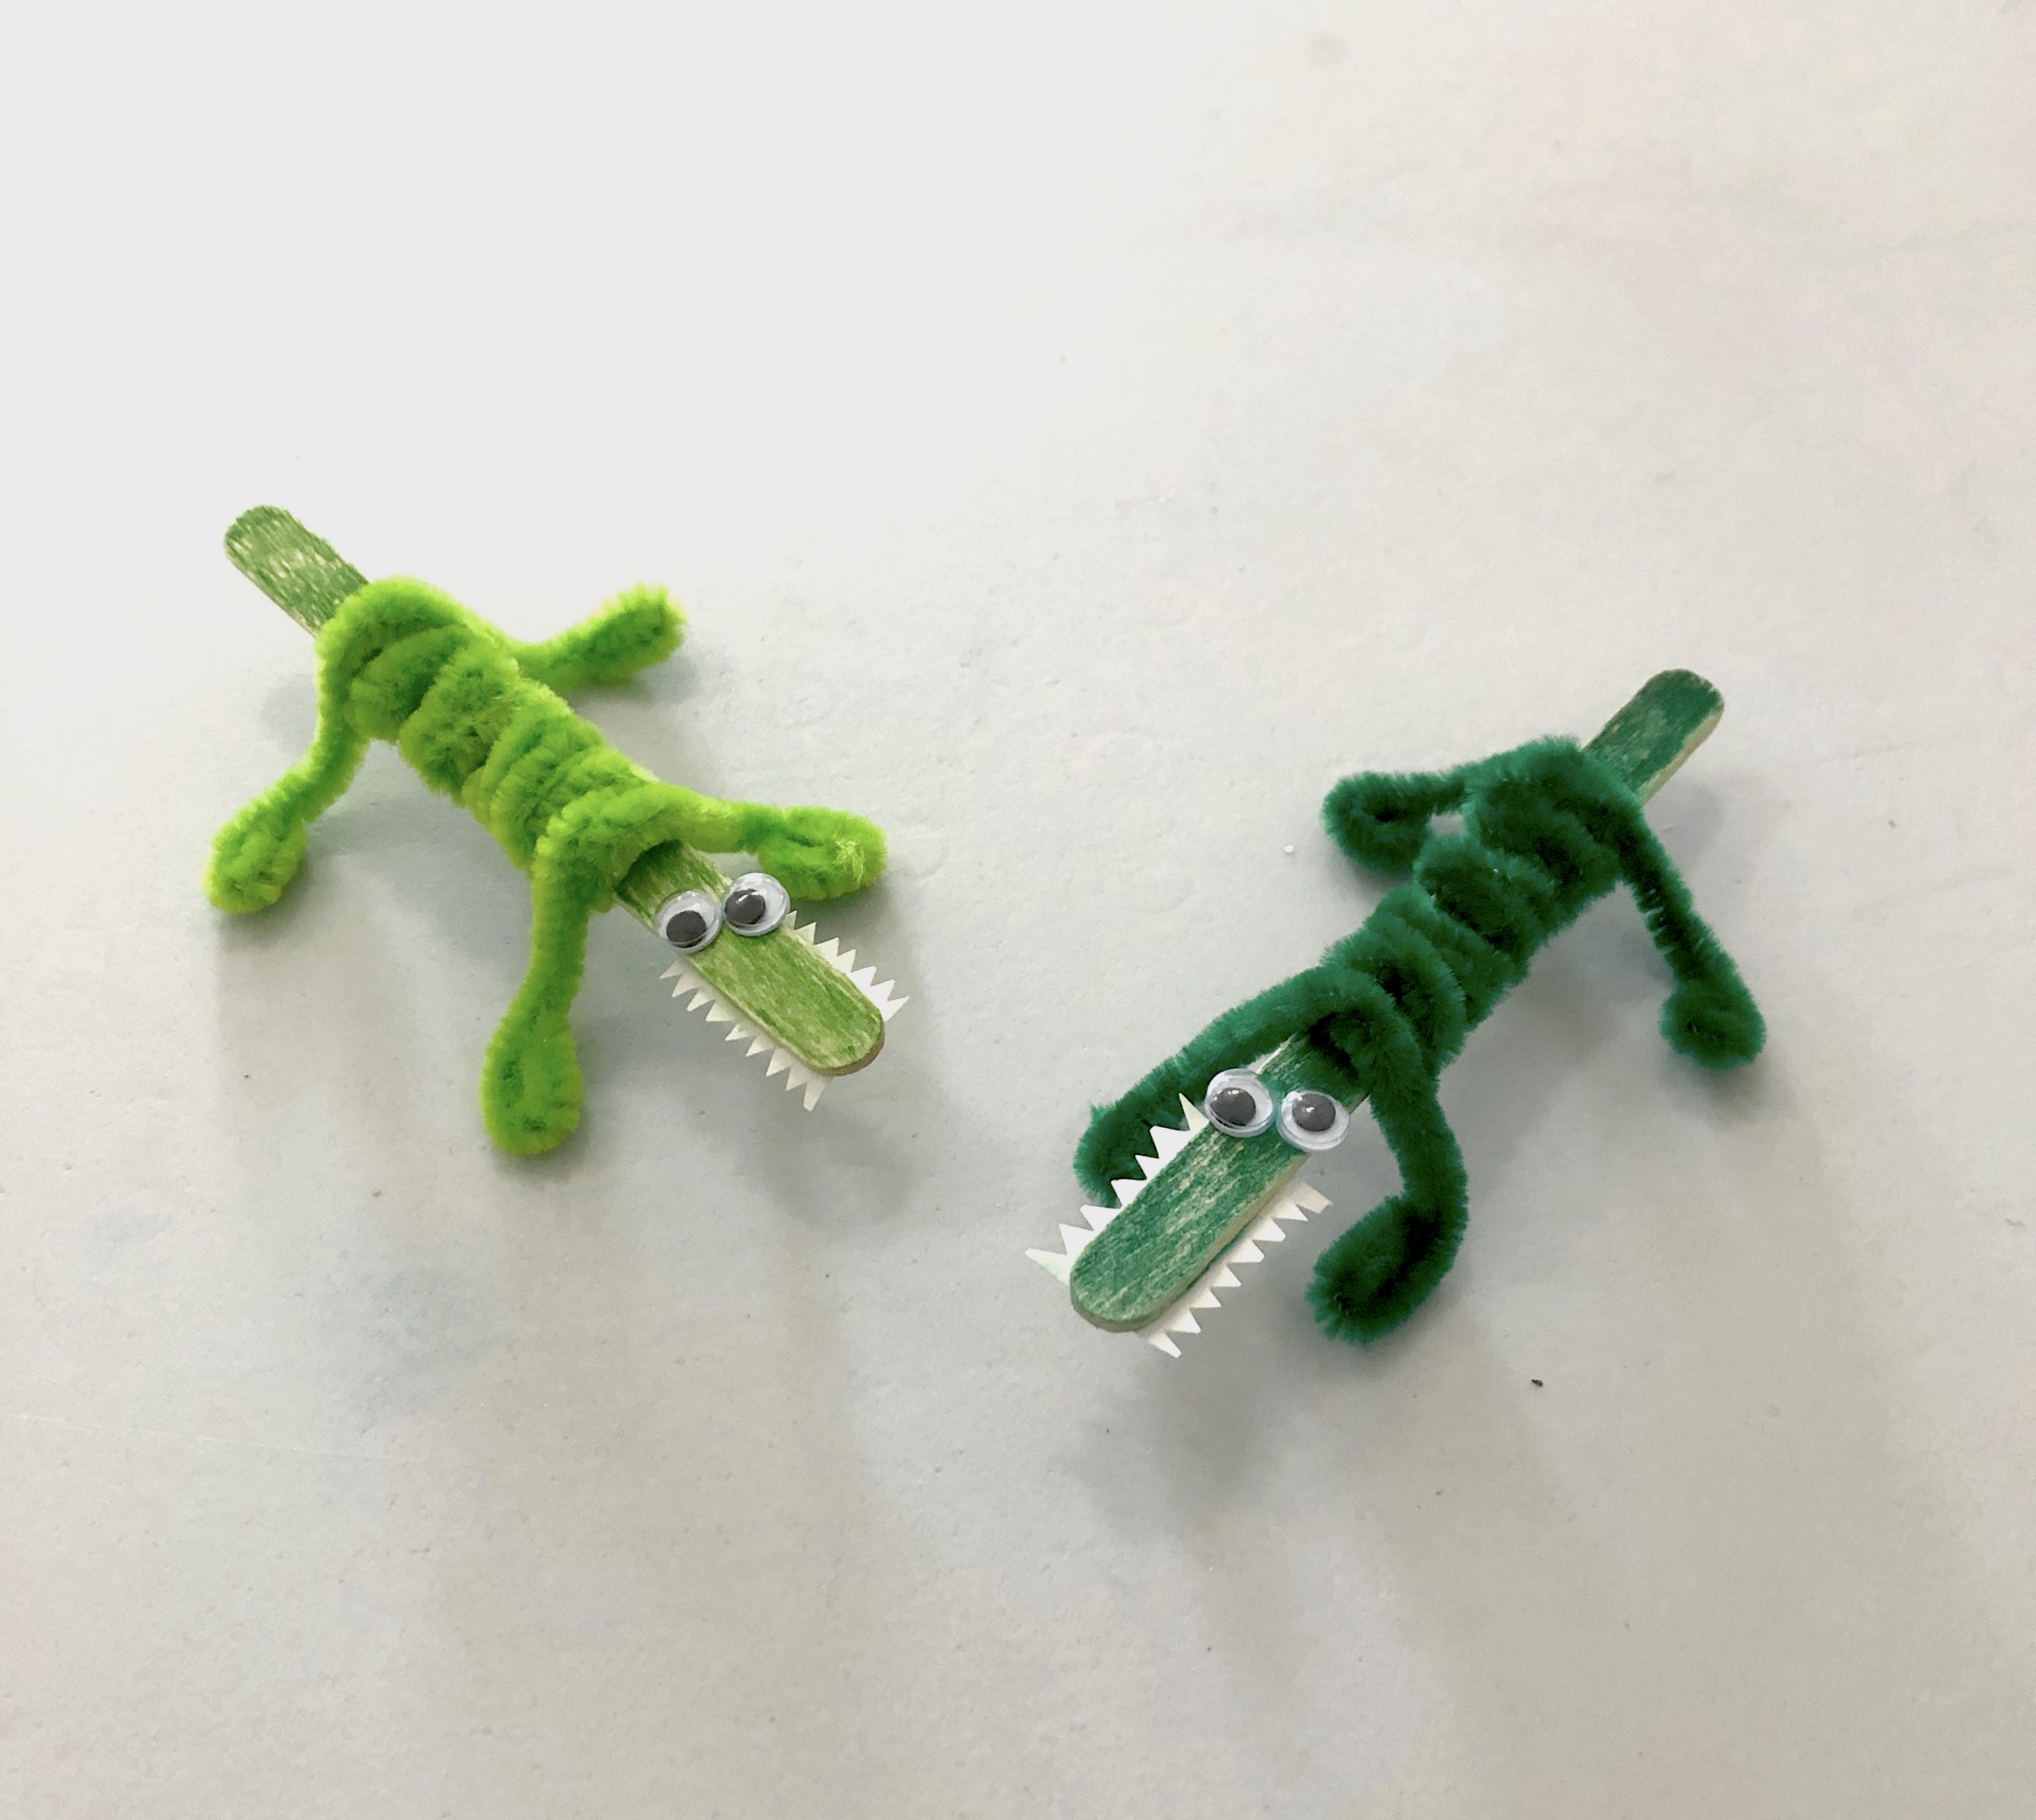 Photo depicting alligator craft made out of pipe cleaners and popsicle sticks.